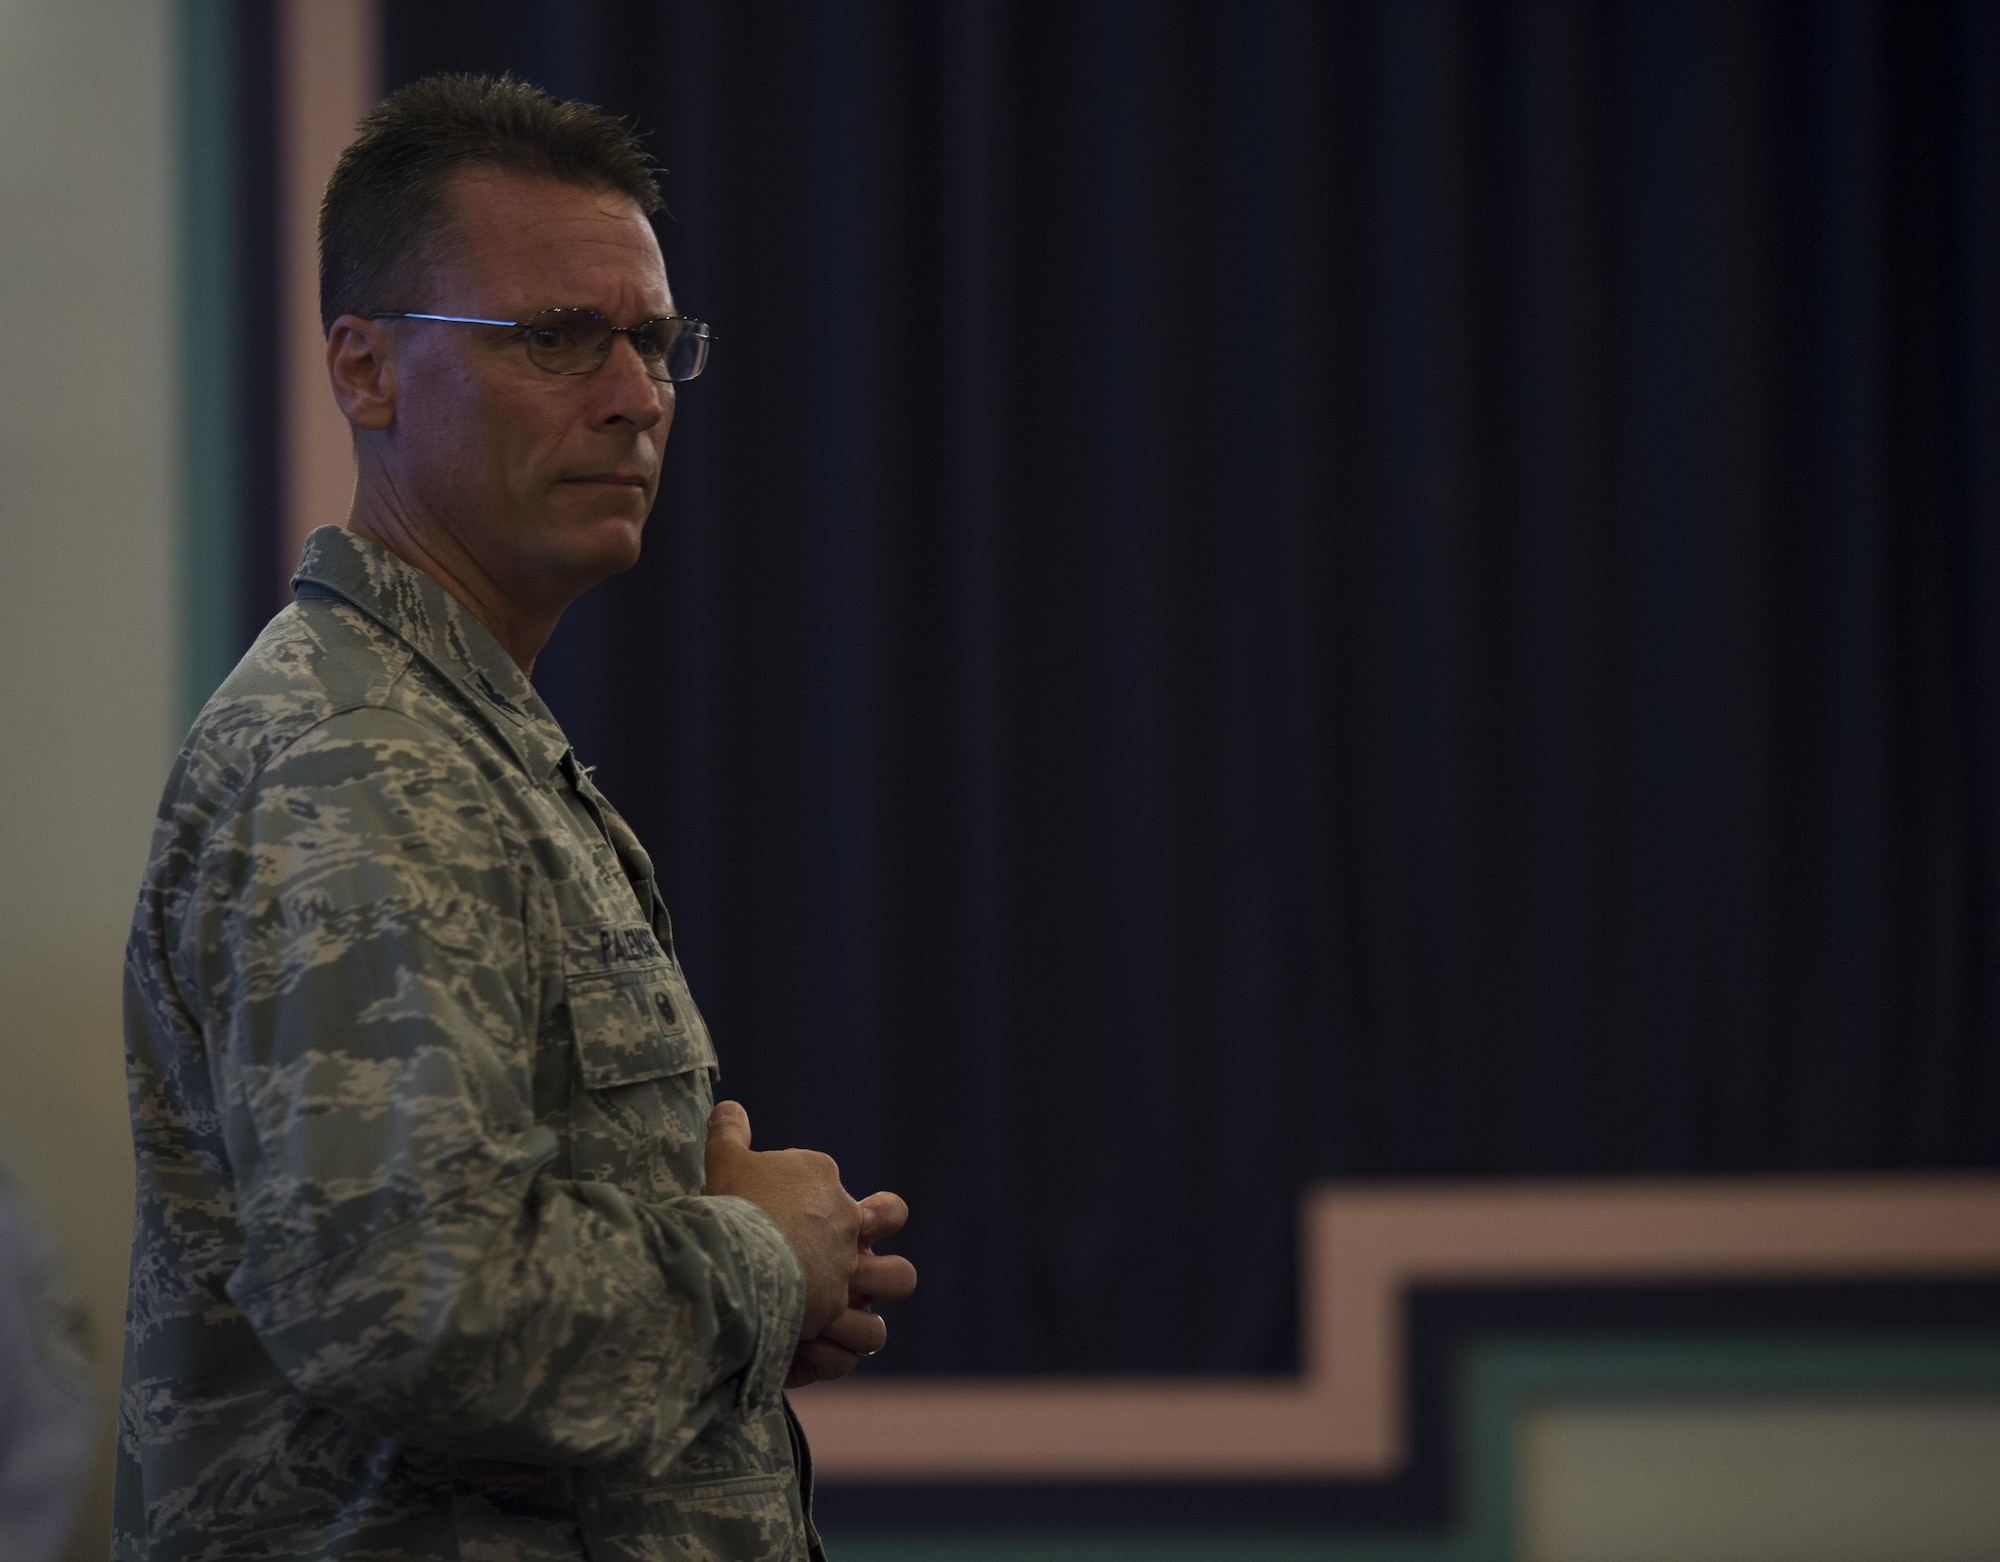 Col. Tom Palenske, vice commander of the 1st Special Operations Wing, speaks at a newcomers' briefing at Hurlburt Field, Fla., June 7, 2016. Palenske took command of the 1st SOW during a change of command ceremony here, June 10, 2016. (U.S. Air Force Photo by Airman 1st Class Kai White)